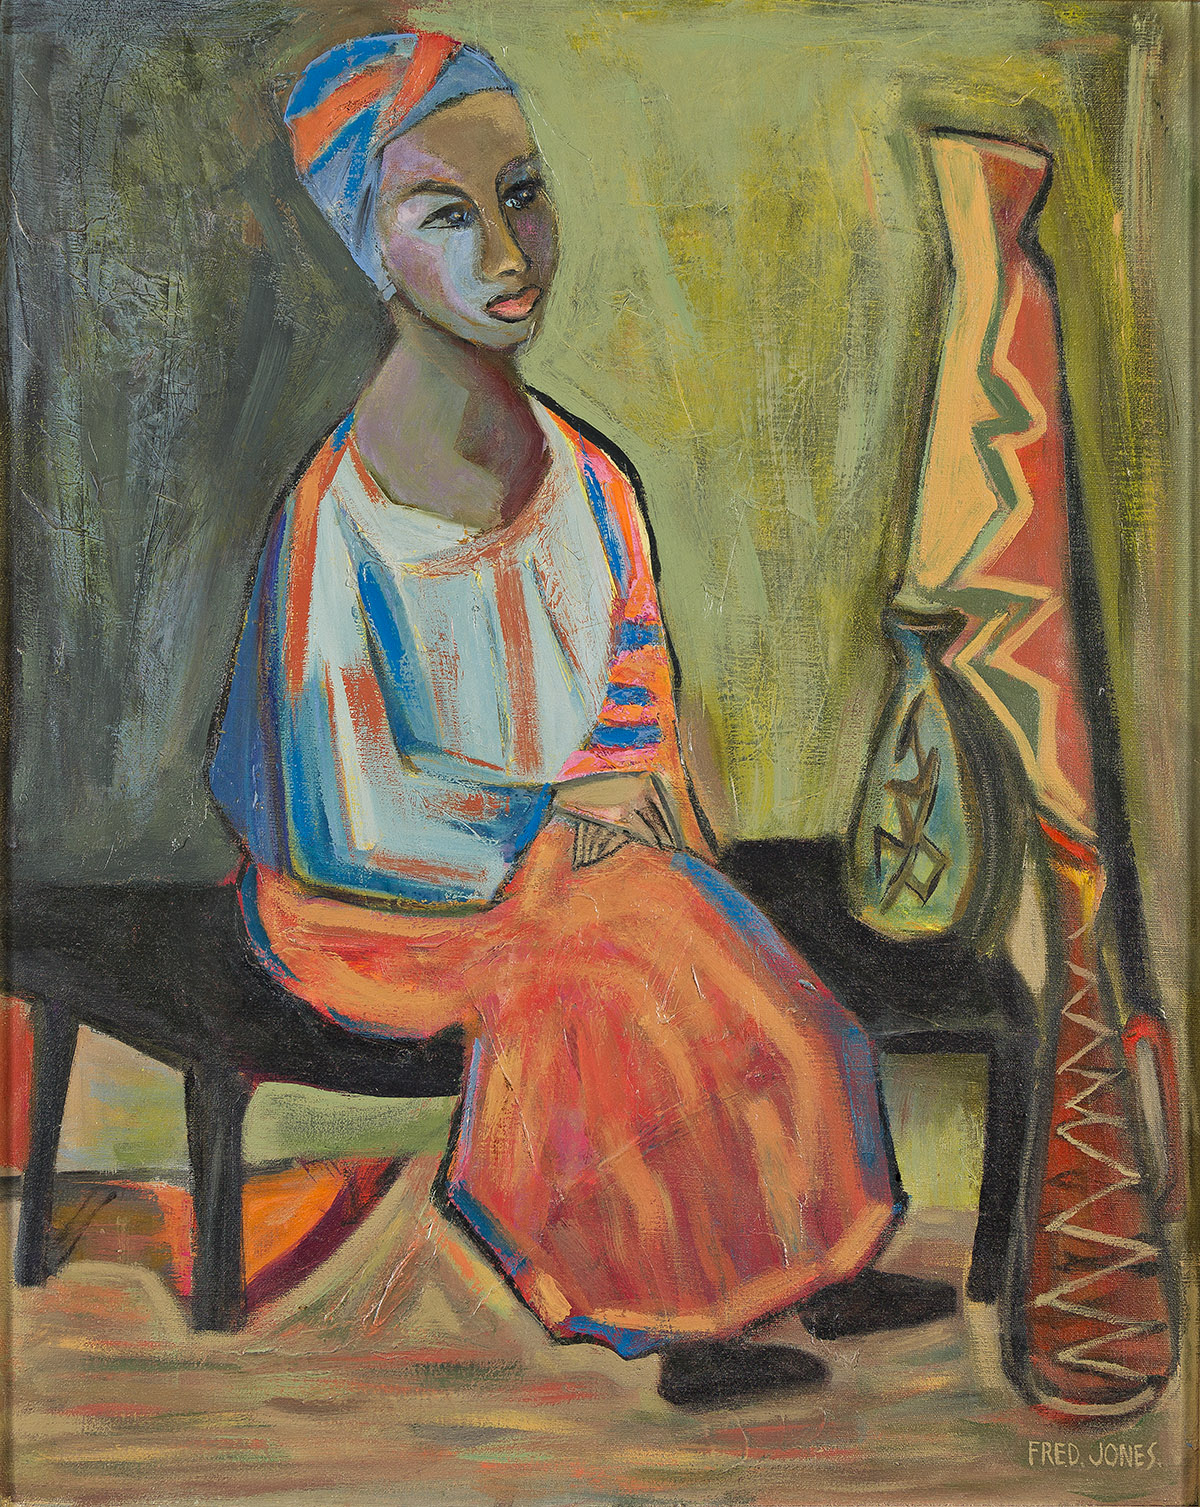 FREDERICK D. JONES (1914 - 2004) Seated Woman in African Dress with Sculpture.